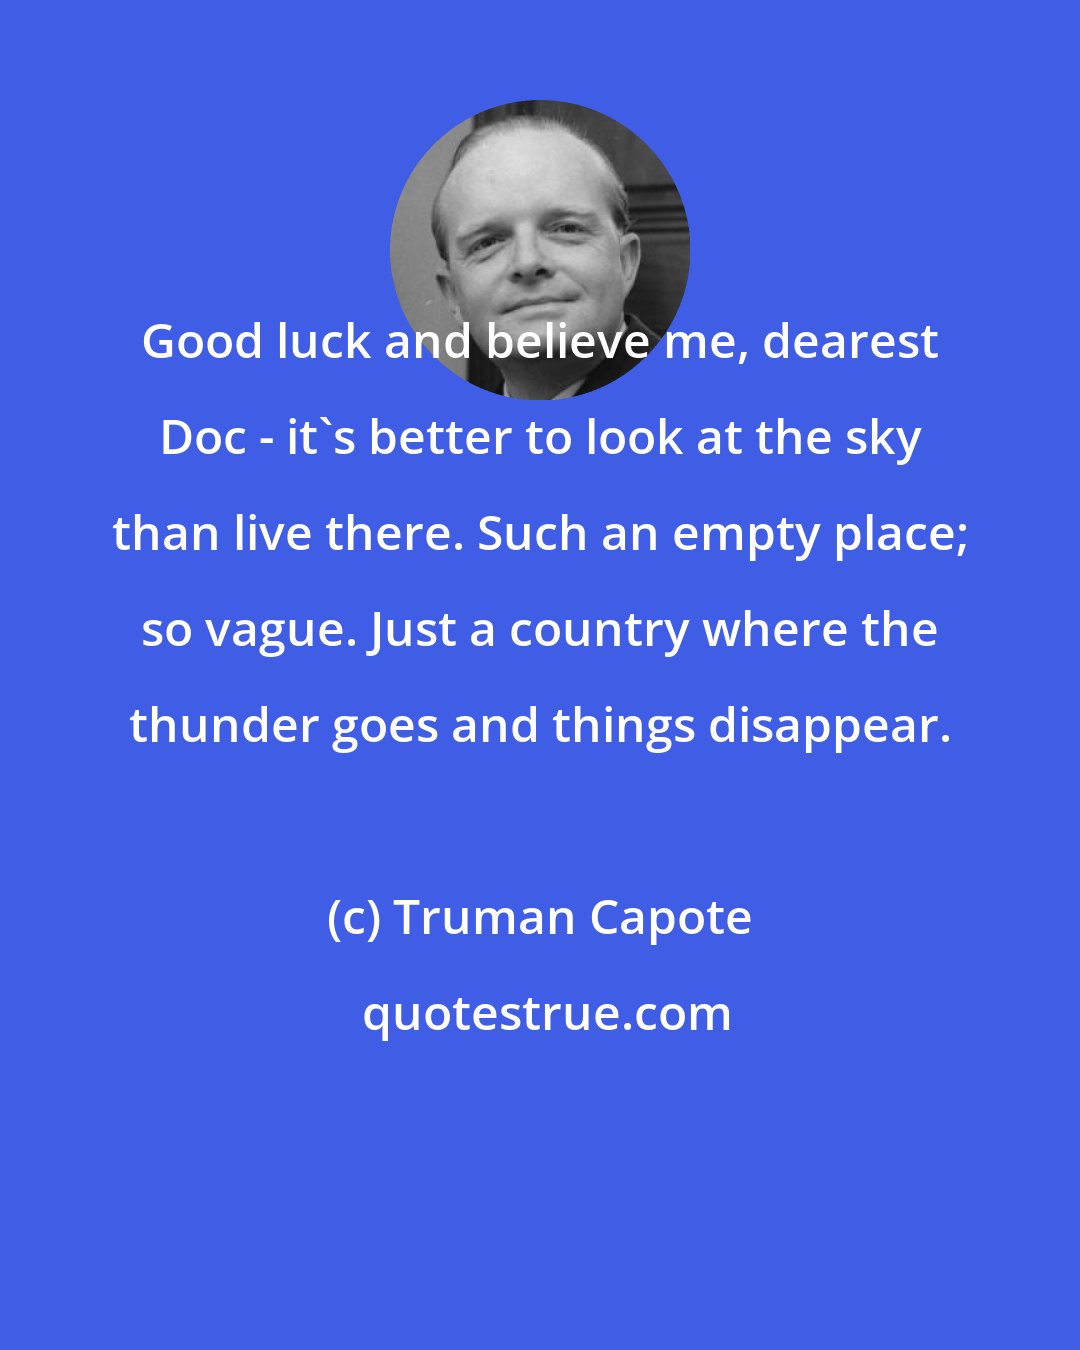 Truman Capote: Good luck and believe me, dearest Doc - it's better to look at the sky than live there. Such an empty place; so vague. Just a country where the thunder goes and things disappear.